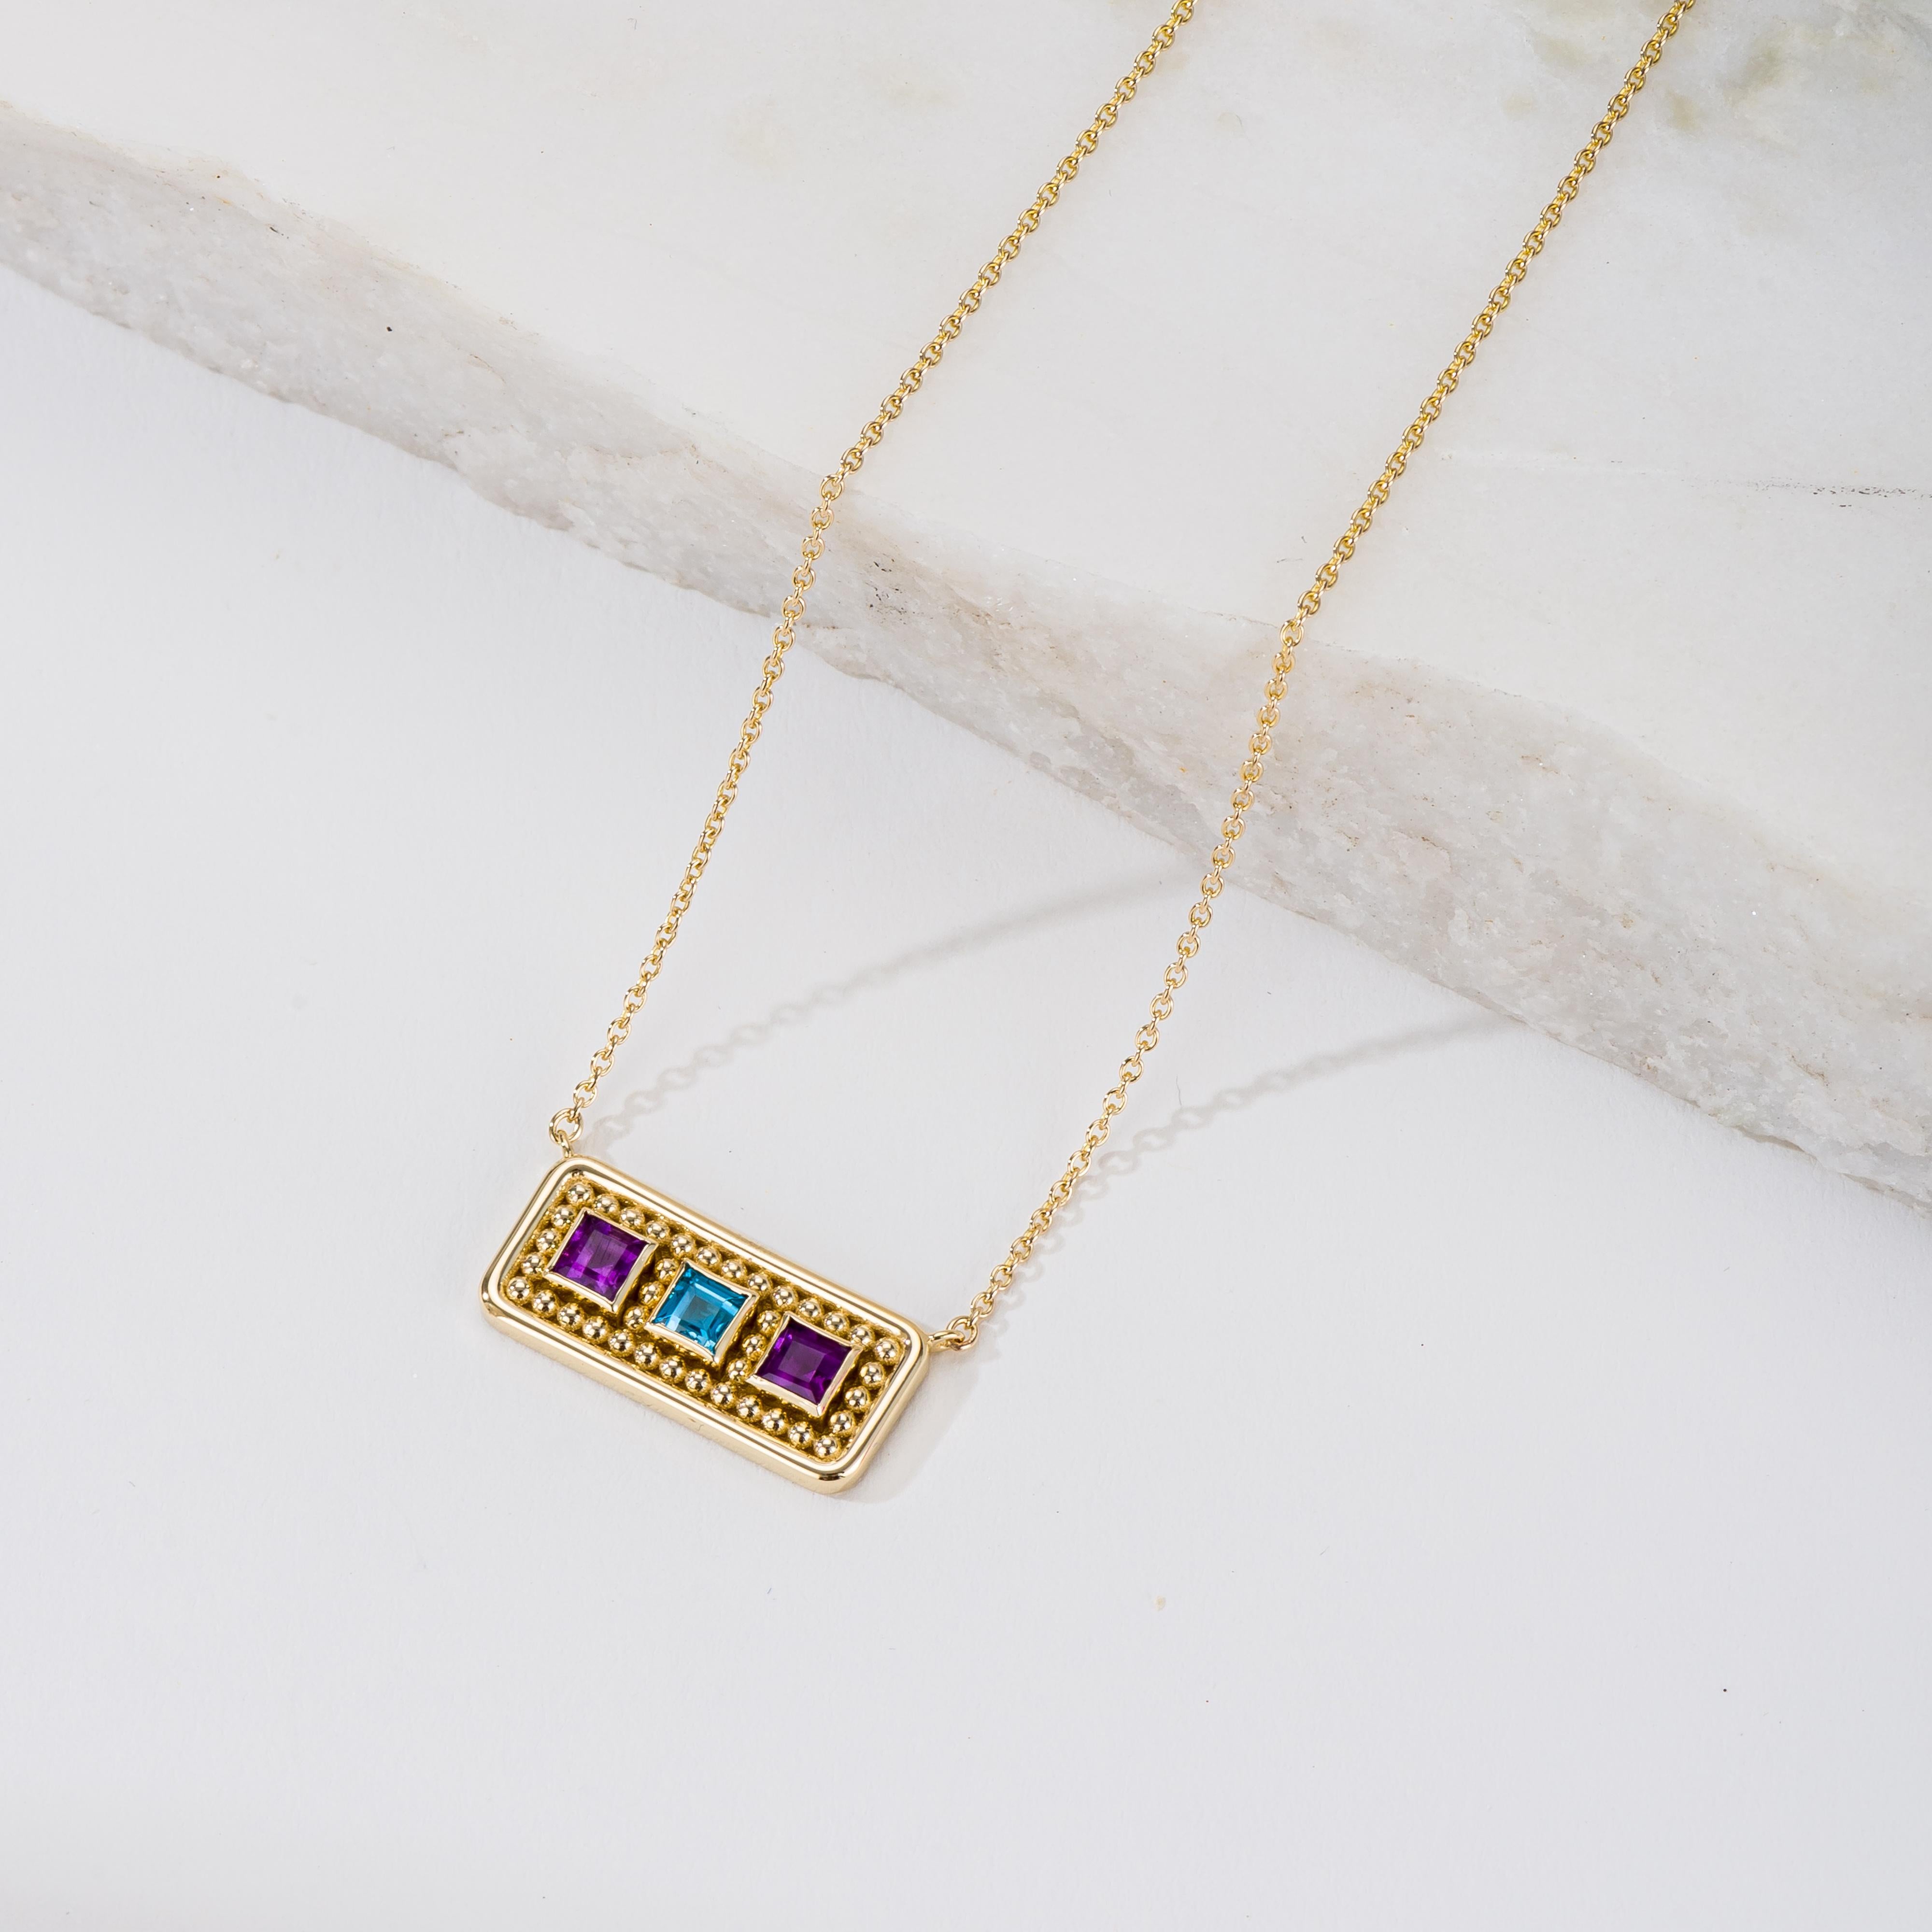 Square Cut Gold Byzantine Pendant with Amethyst Swiss Topaz and Granulation For Sale